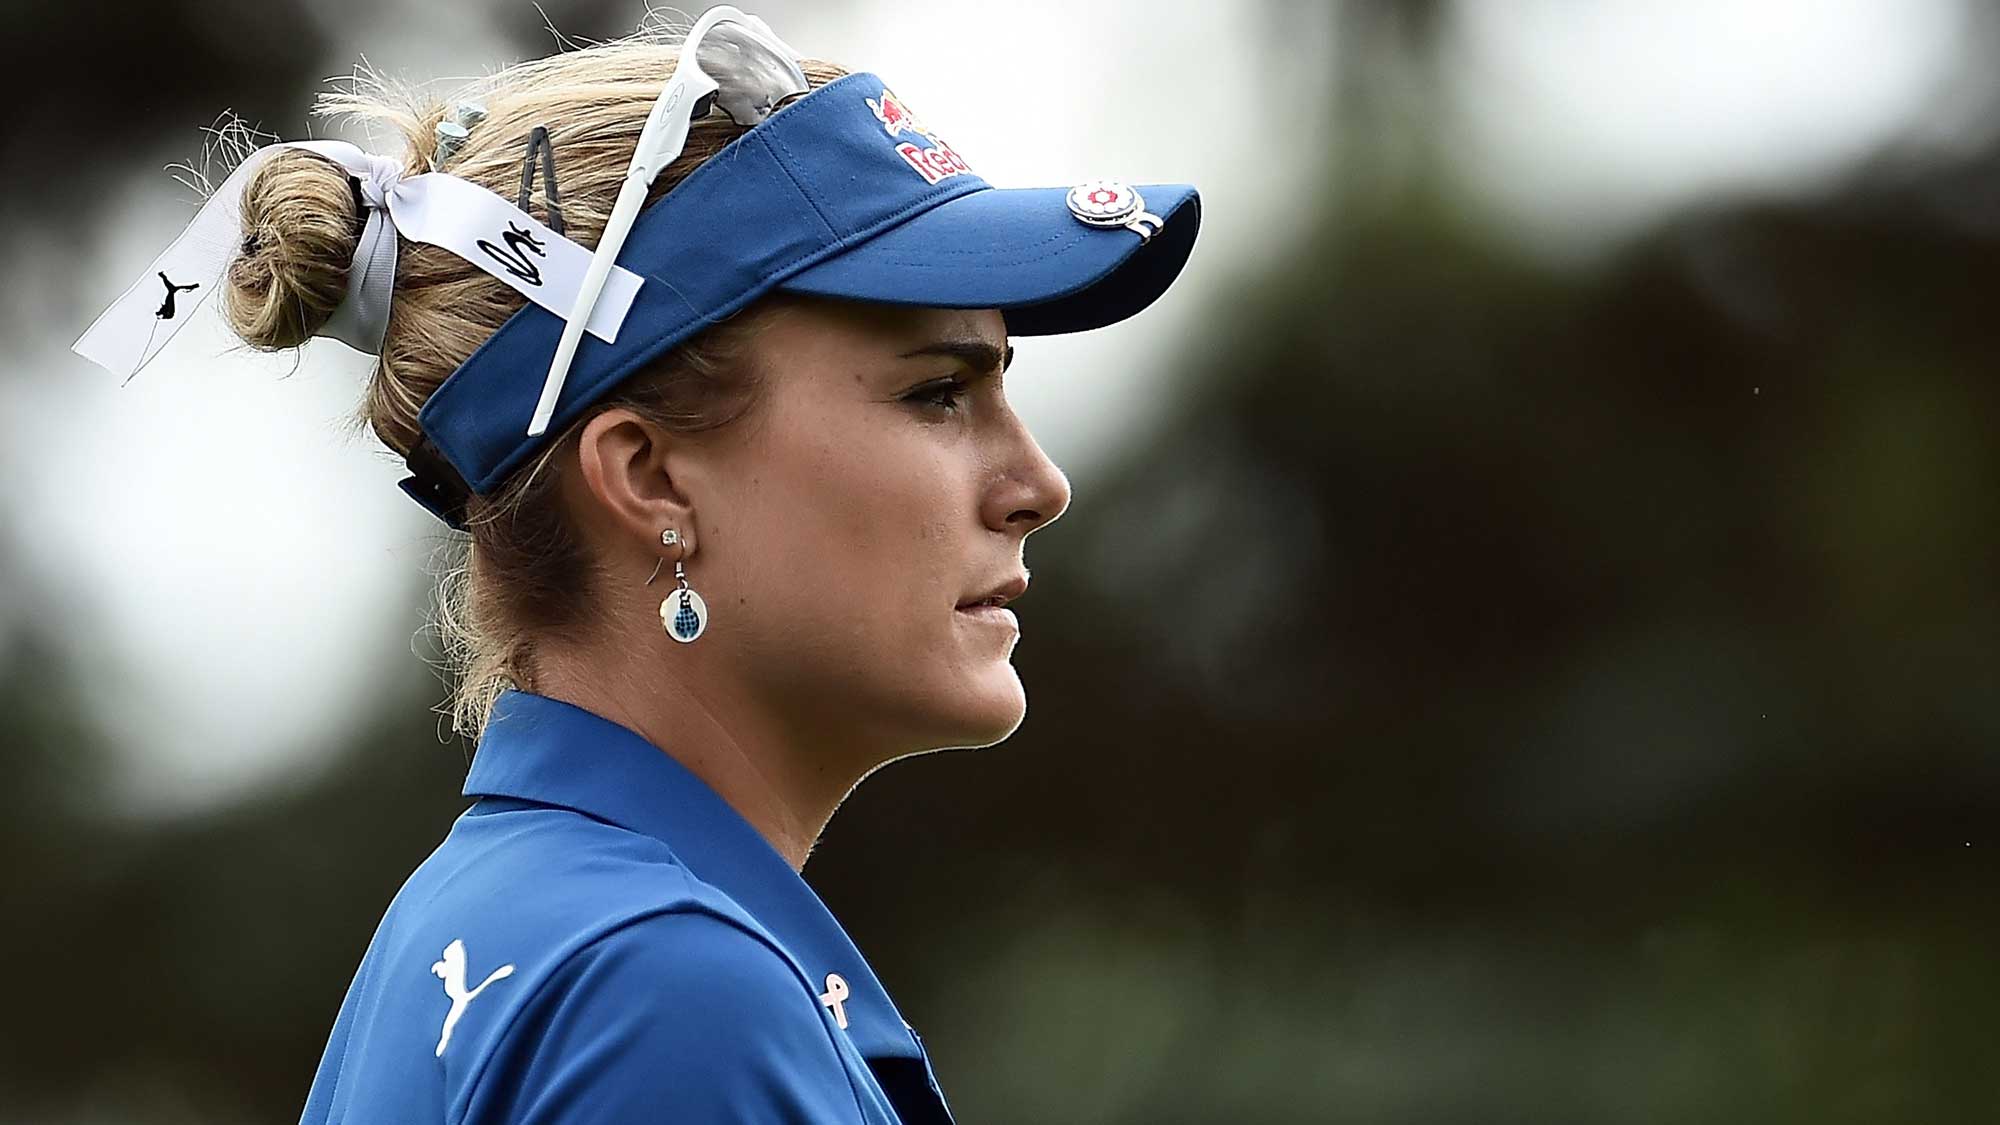 Lexi Thompson waits on the third tee box during the final round of the Meijer LPGA Classic